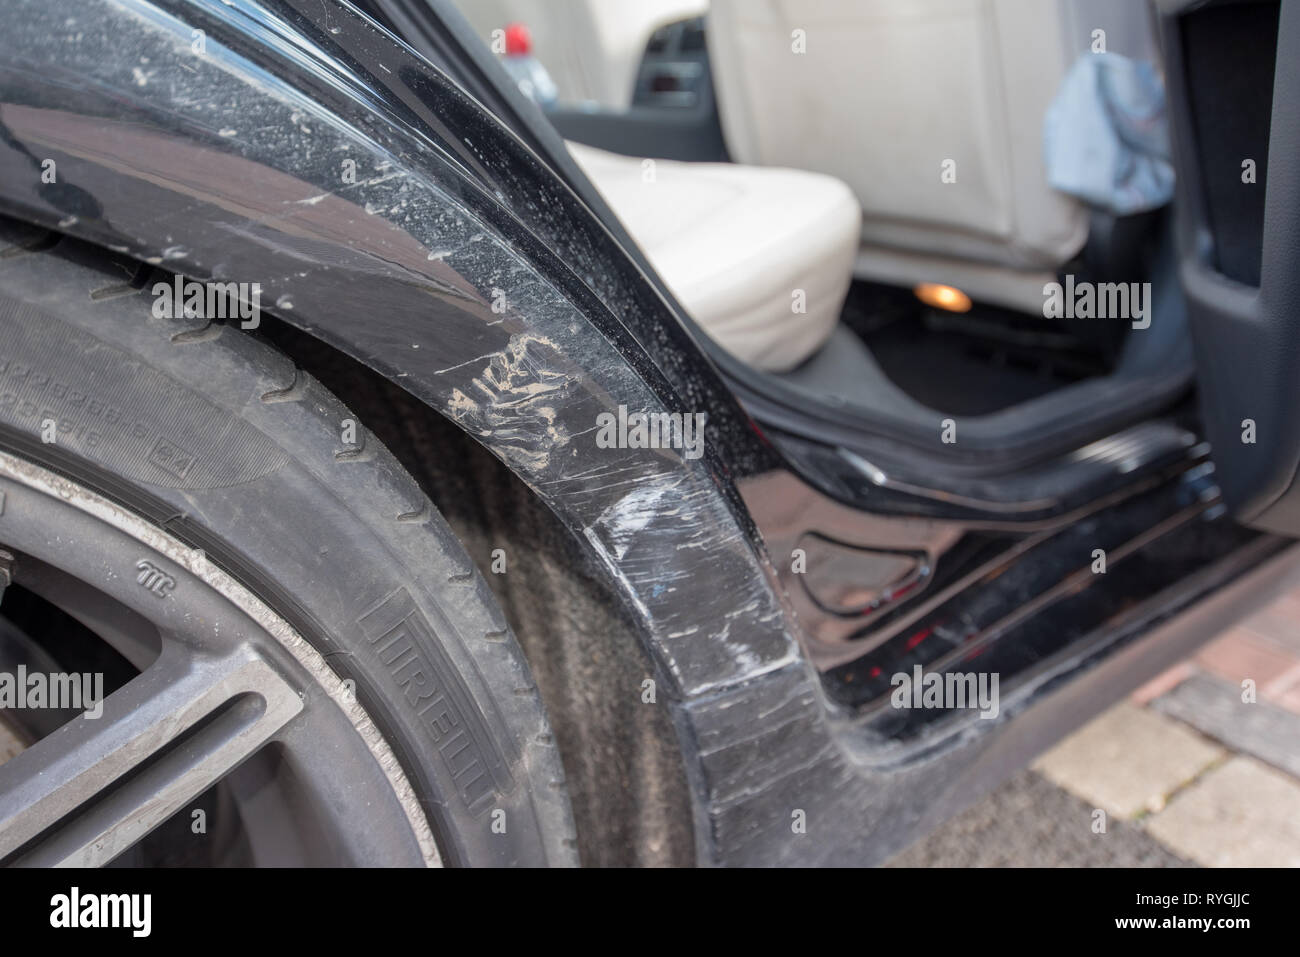 Car crash UK. Close up damage and details after a road traffic accident. Crushed bodywork and tyres. Stock Photo